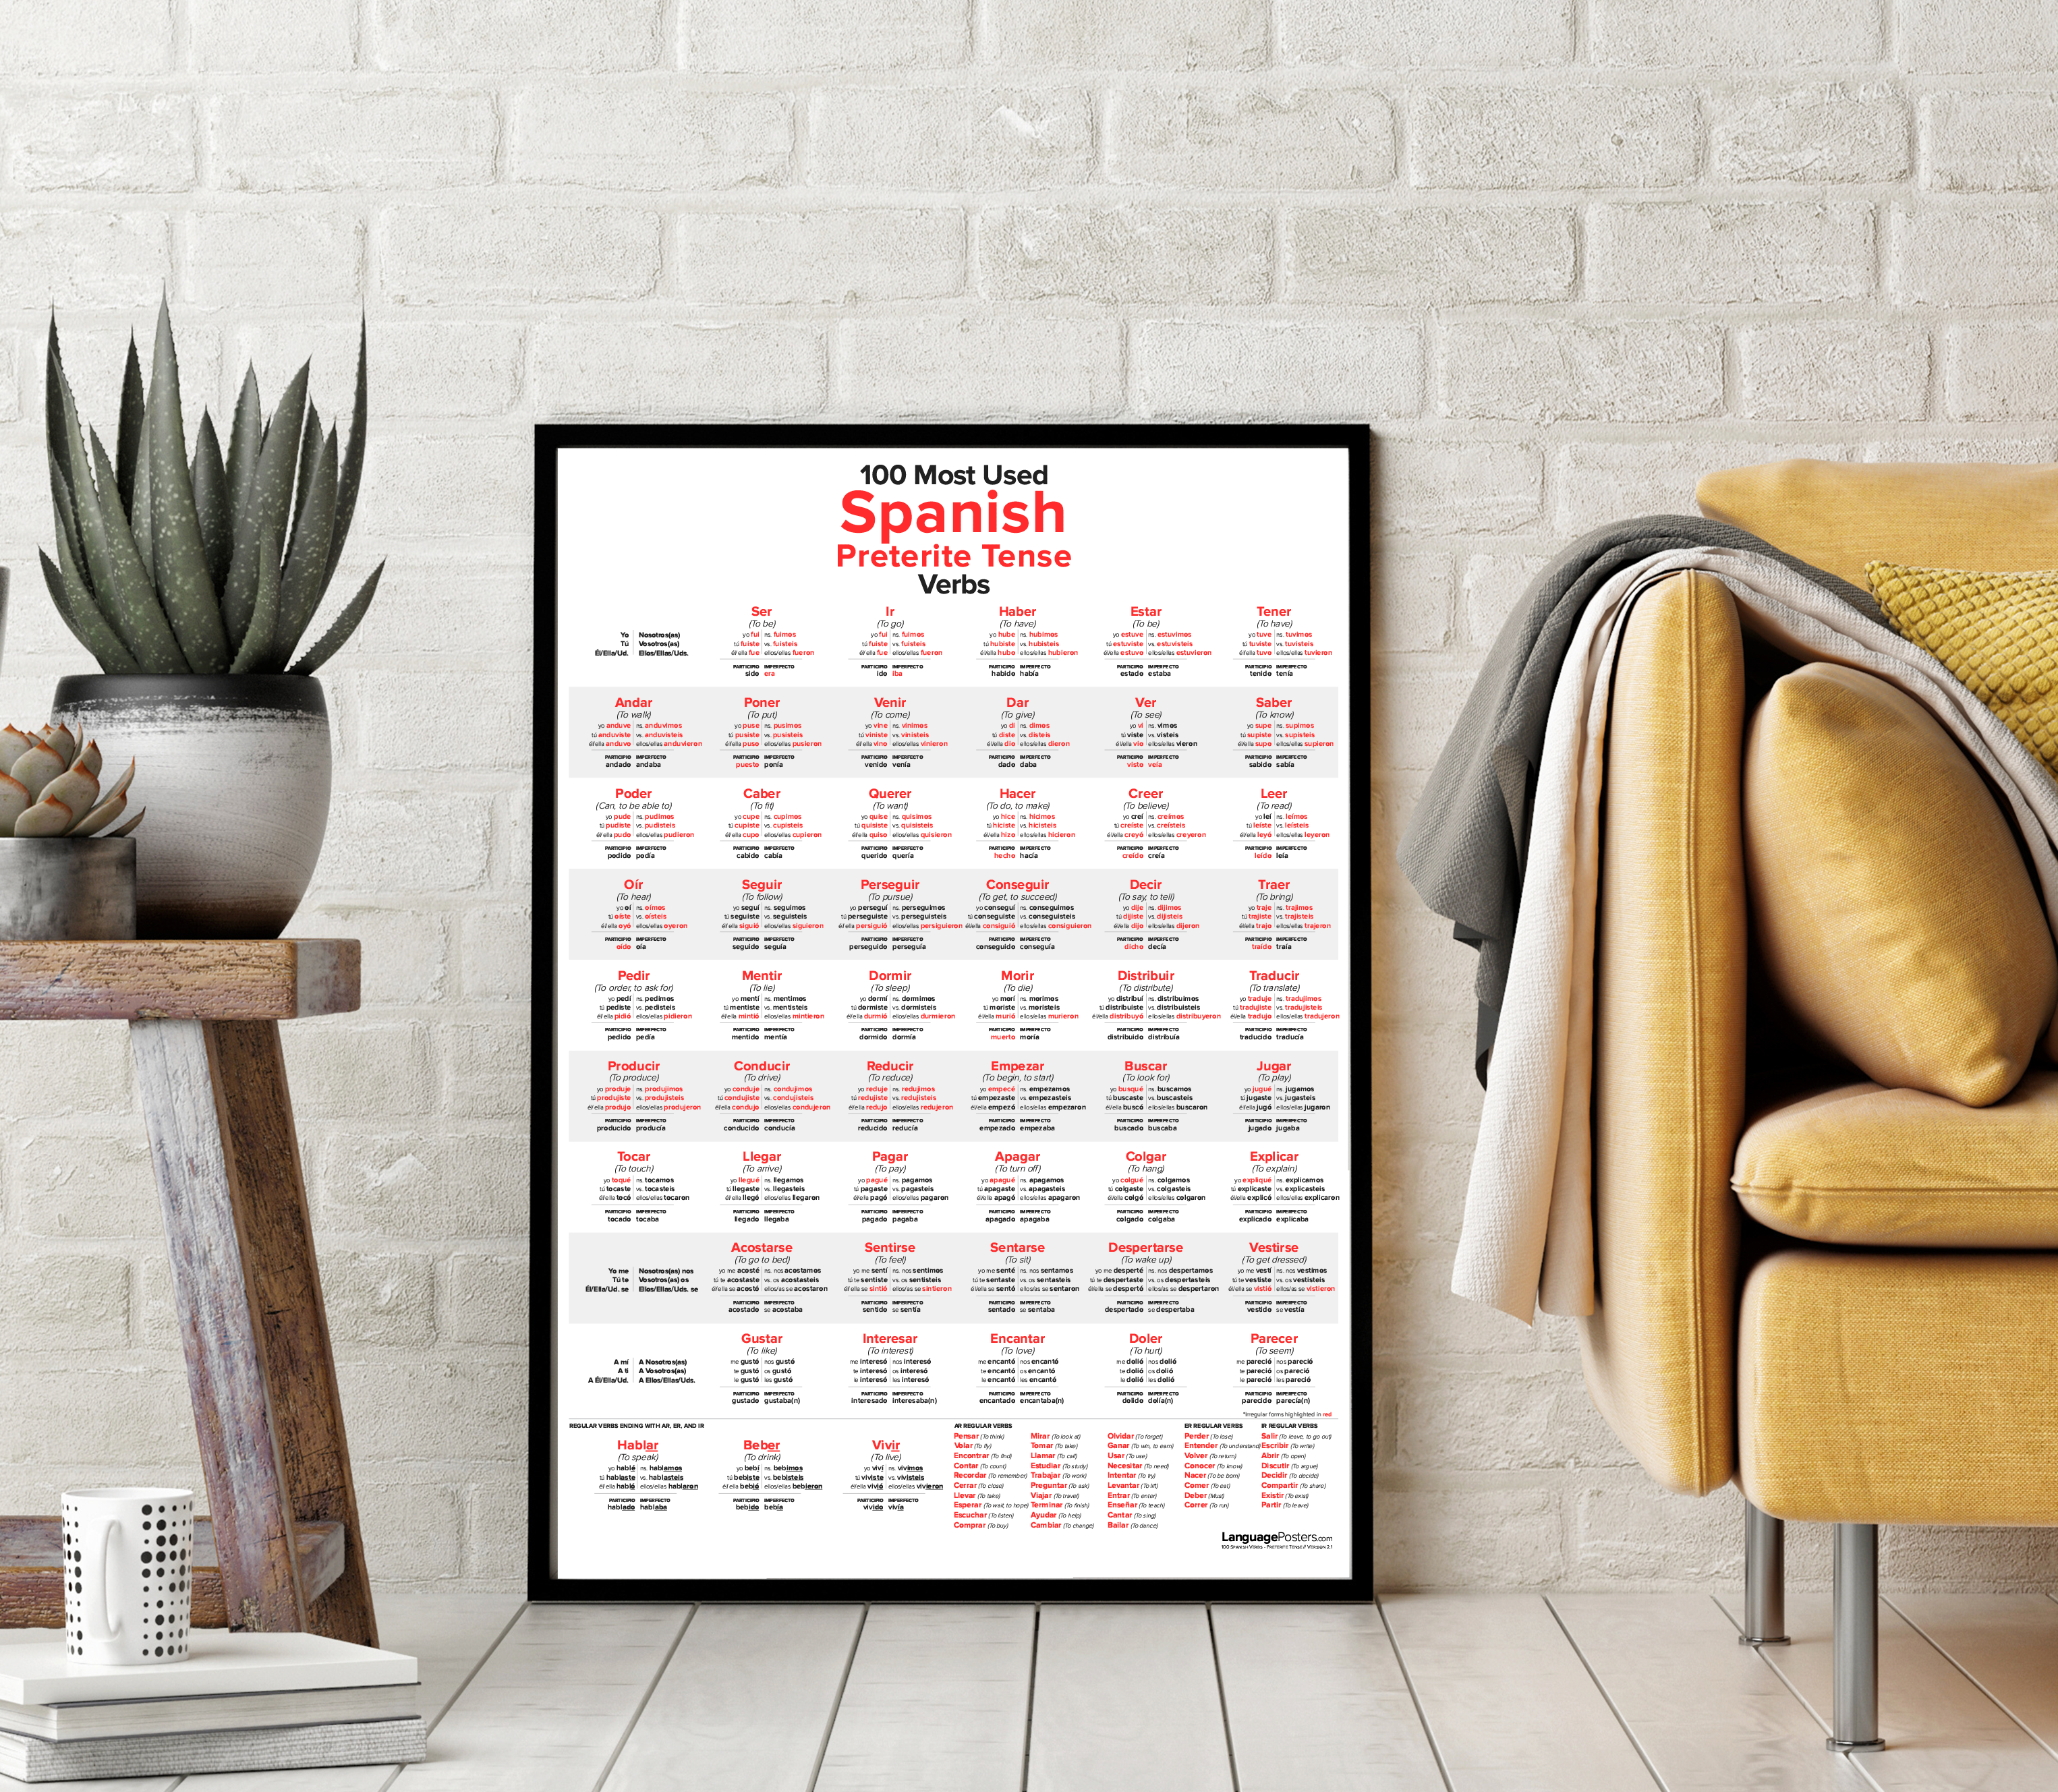 100 Most Used Spanish Preterite Tense Verbs Poster in frame - LanguagePosters.com